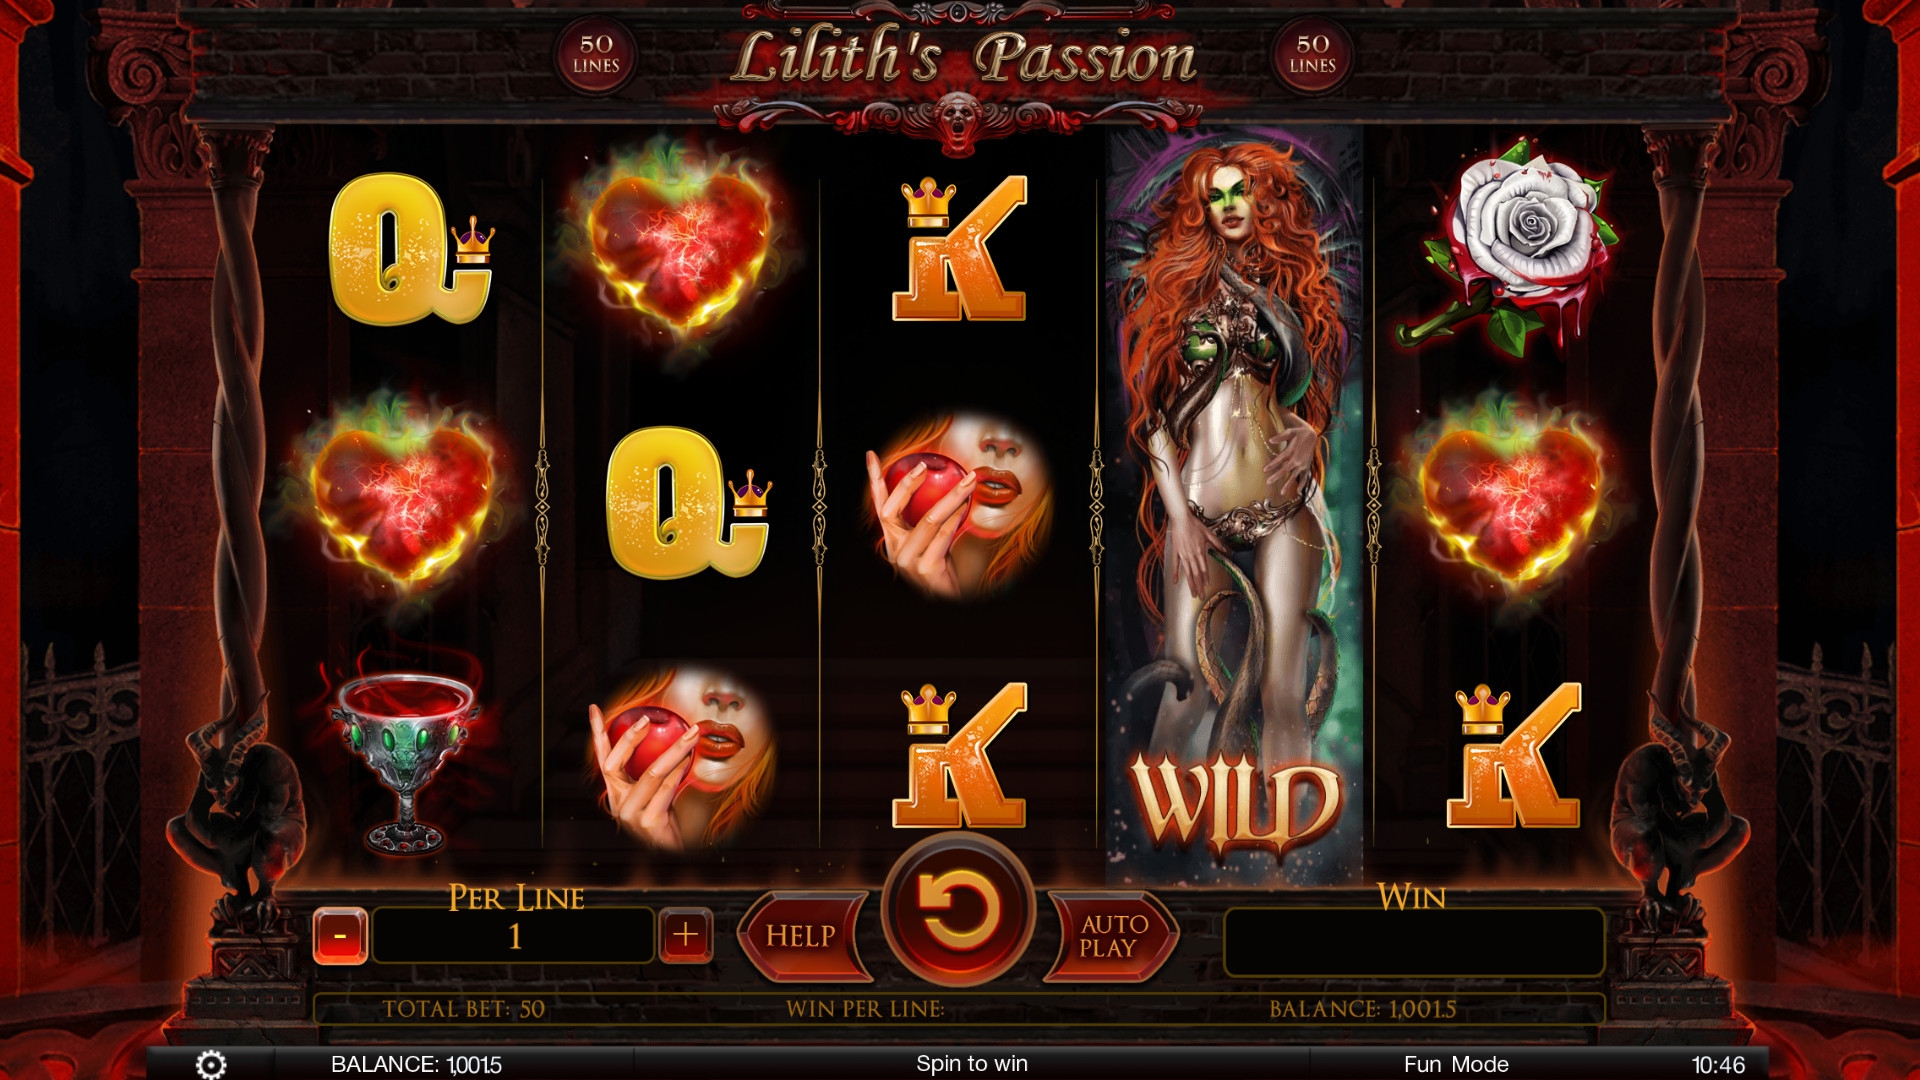 Lilith’s Passion (Lilith’s Passion) from category Slots